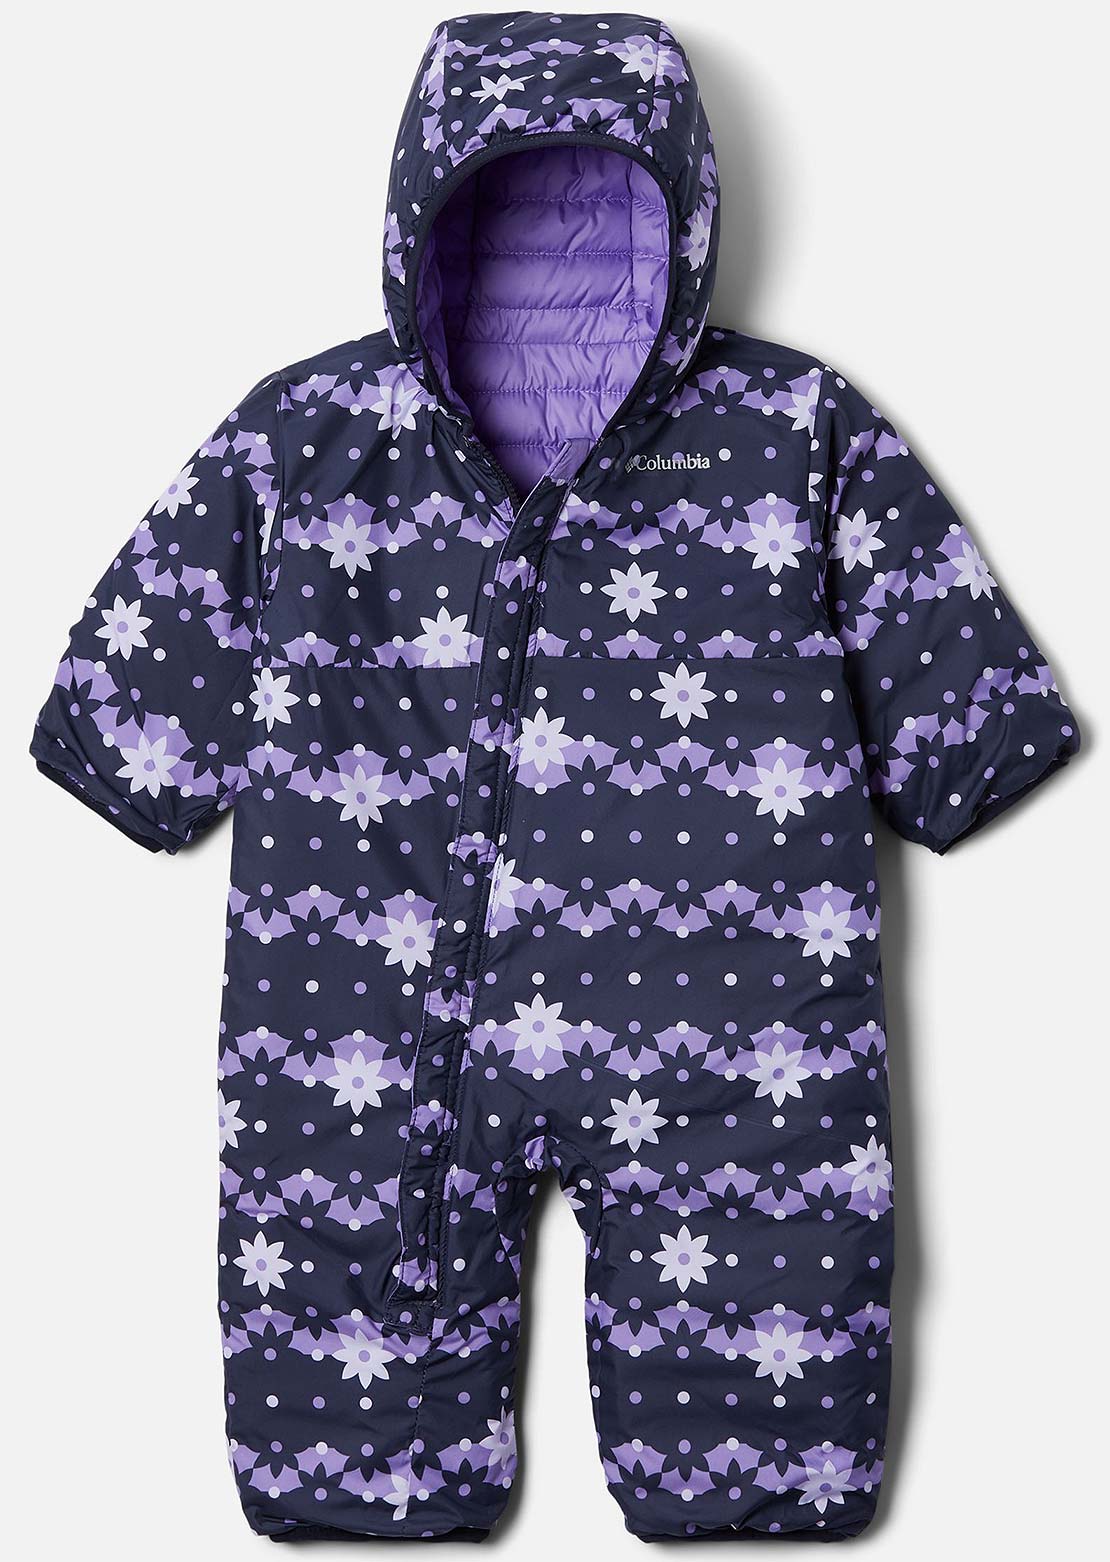 Columbia Infant Powder Lite Reversible Bunting One Piece Nocturnal/Paisley Purple/Dark Nocturnal Daisydot